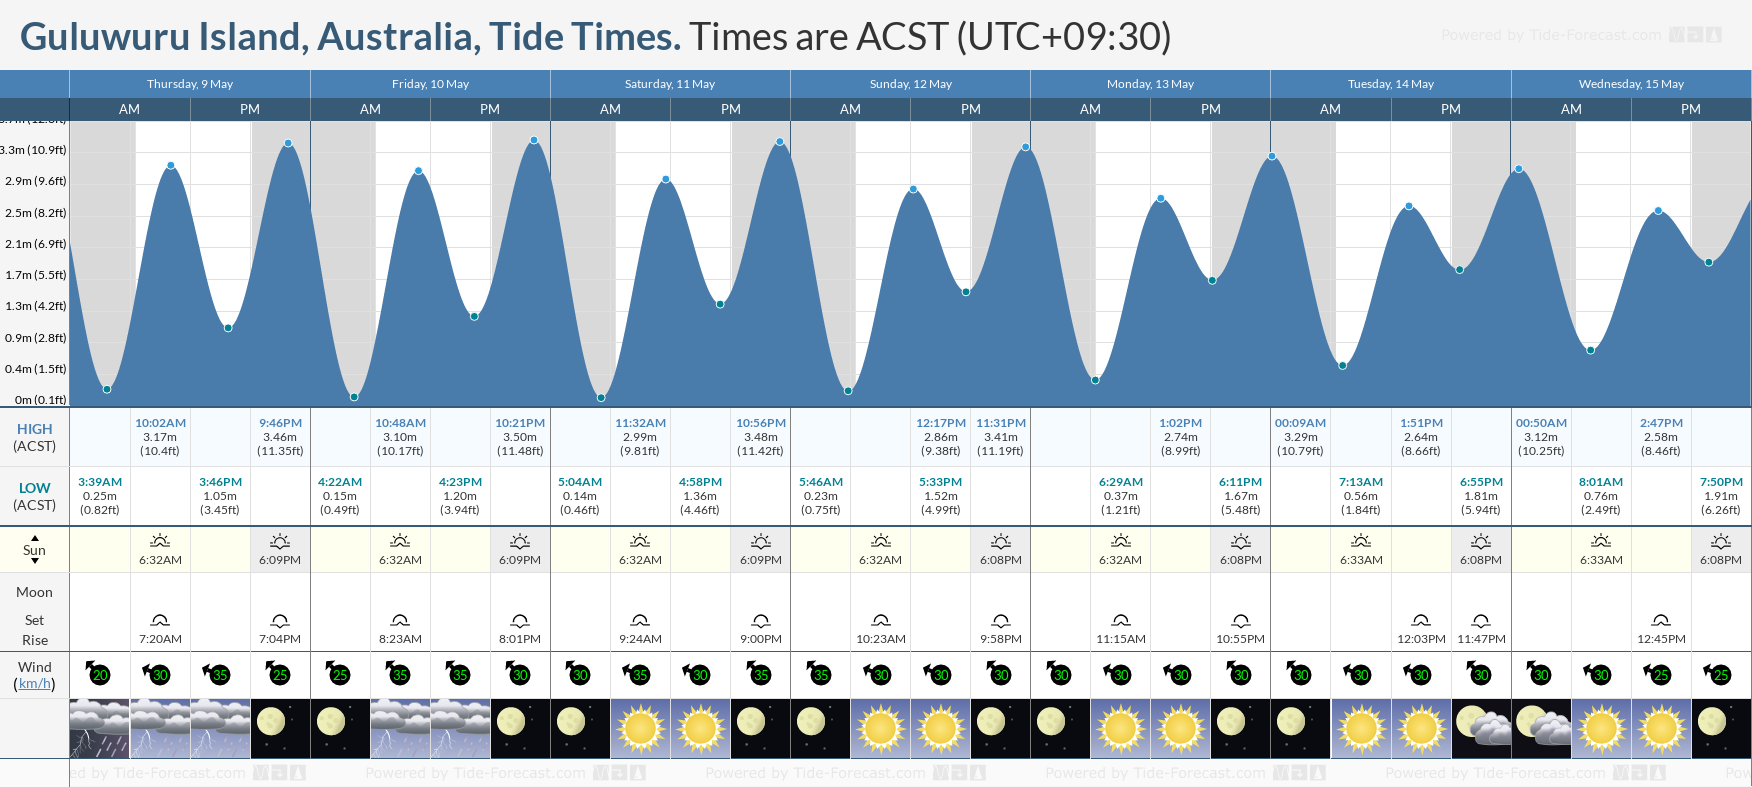 Guluwuru Island, Australia Tide Chart including high and low tide tide times for the next 7 days